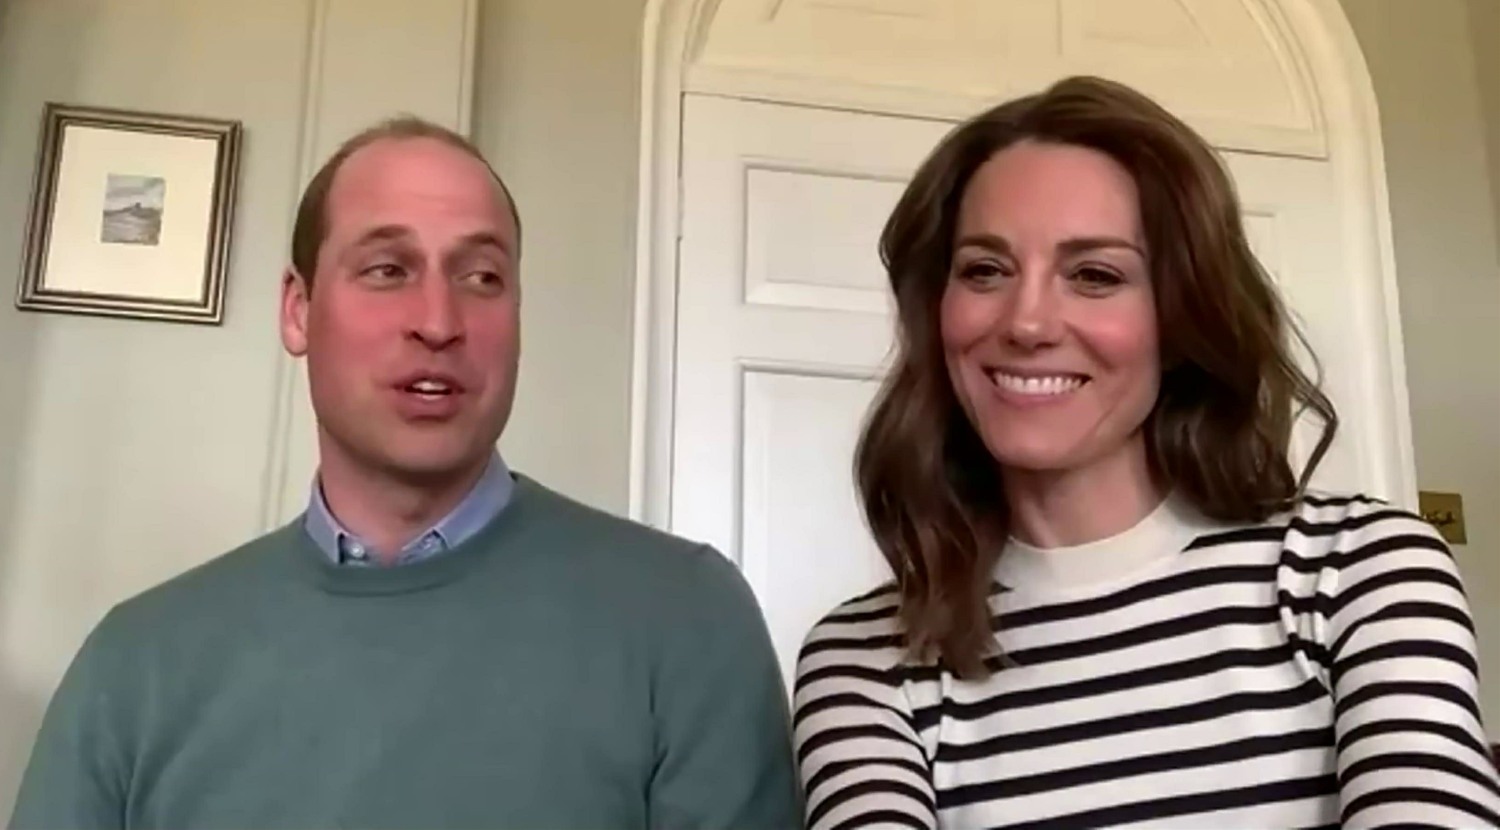 Prince William and Catherine, Duchess of Cambridge reveal how they stay in touch with the rest of the Royal family